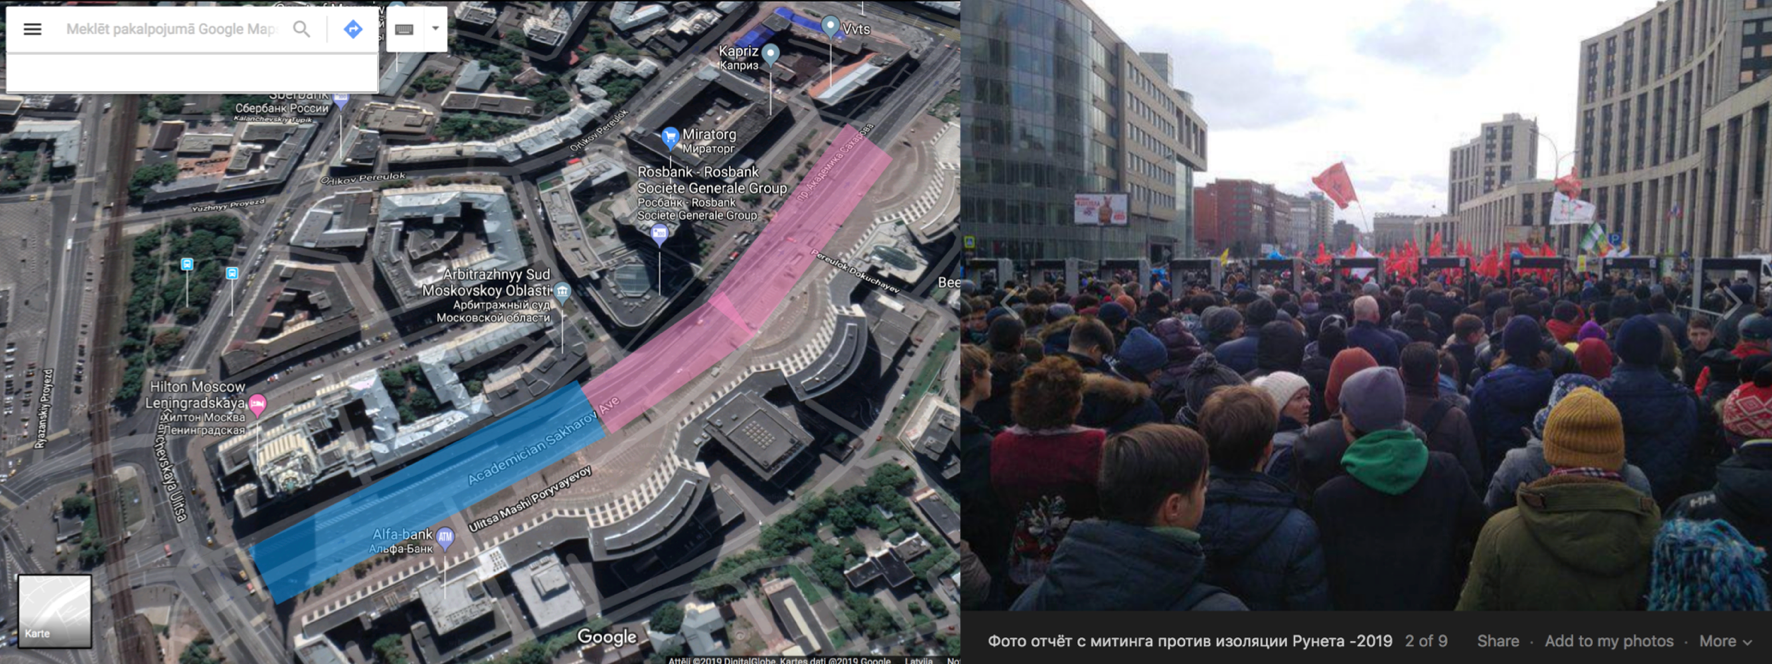 #DigitalResilience: Russians Demonstrate Against Digital Isolation Law